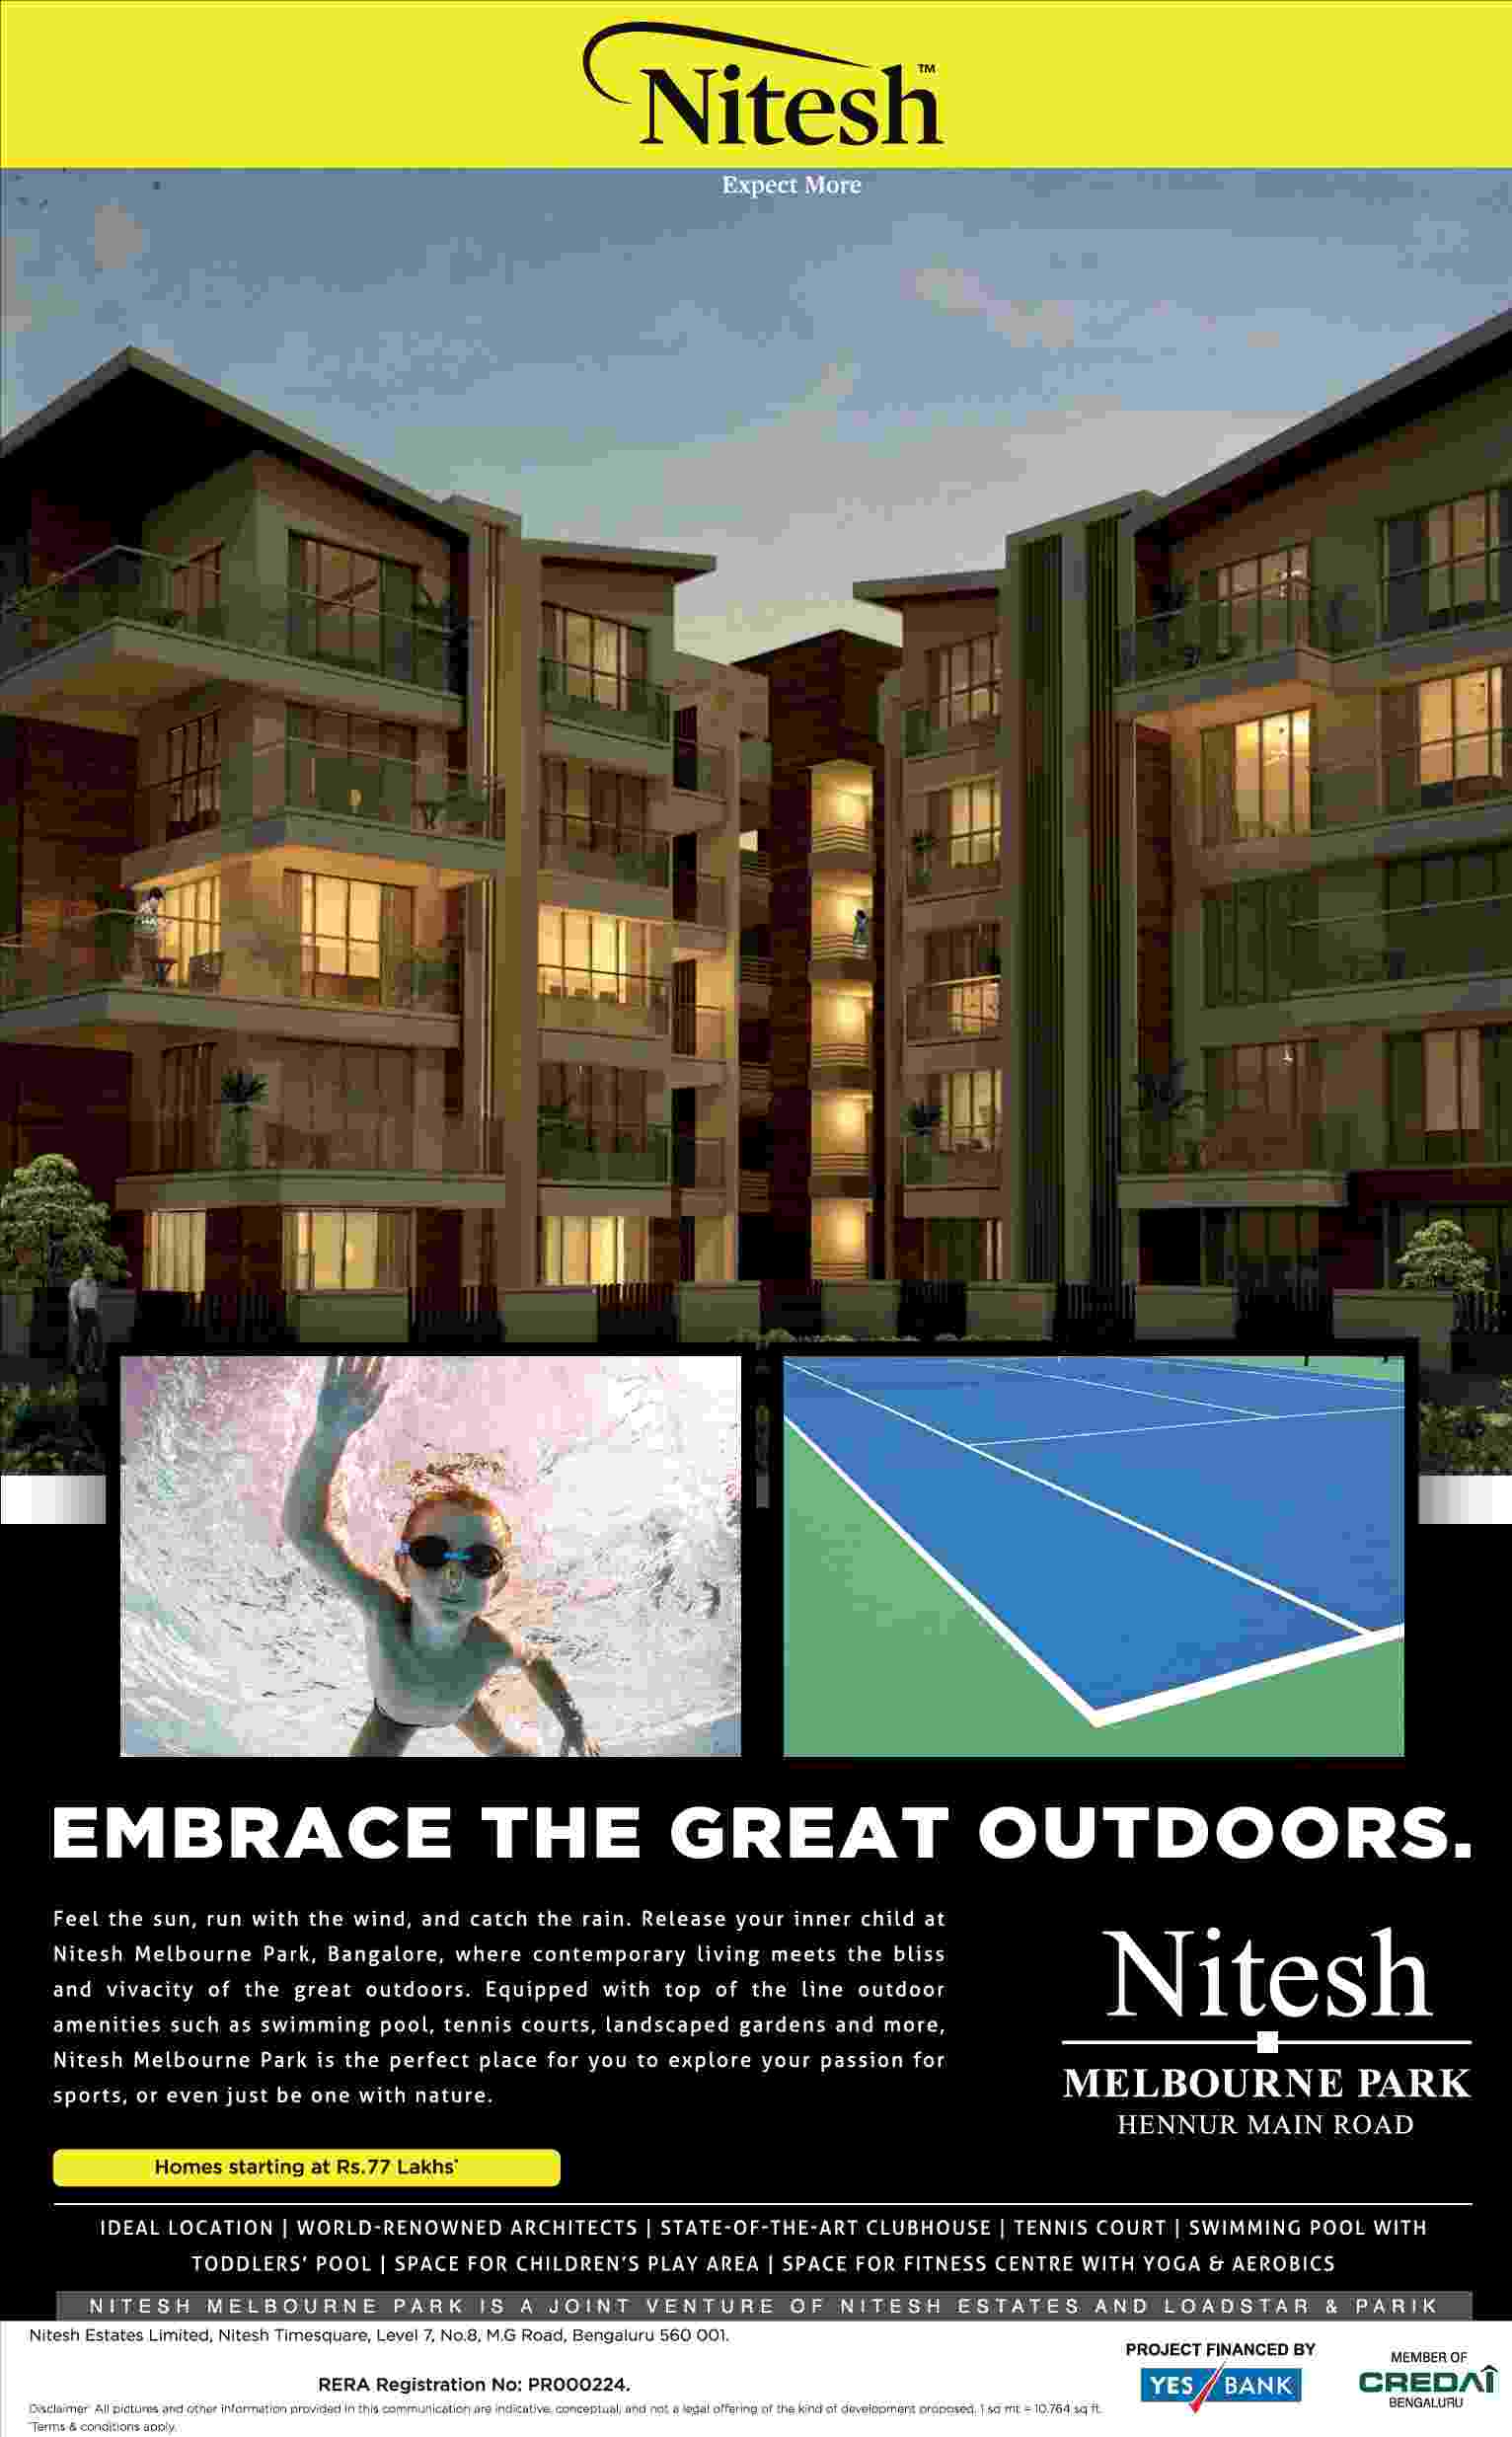 Embrace the great outdoors at Nitesh Melbourne Park in Bangalore Update